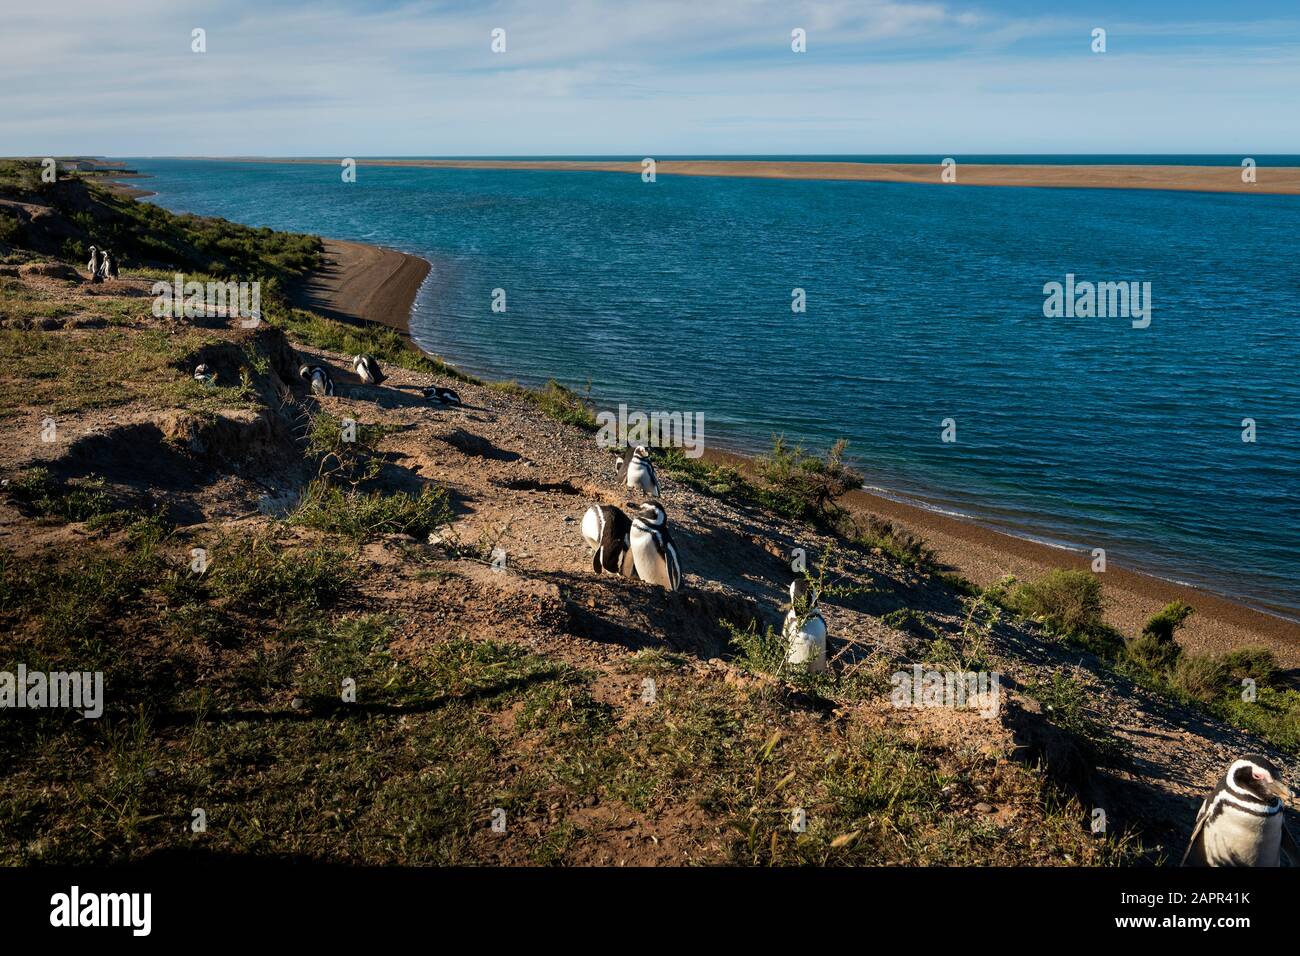 A colony of penguins at the Peninsula Valdes in Argentina, South America. Stock Photo